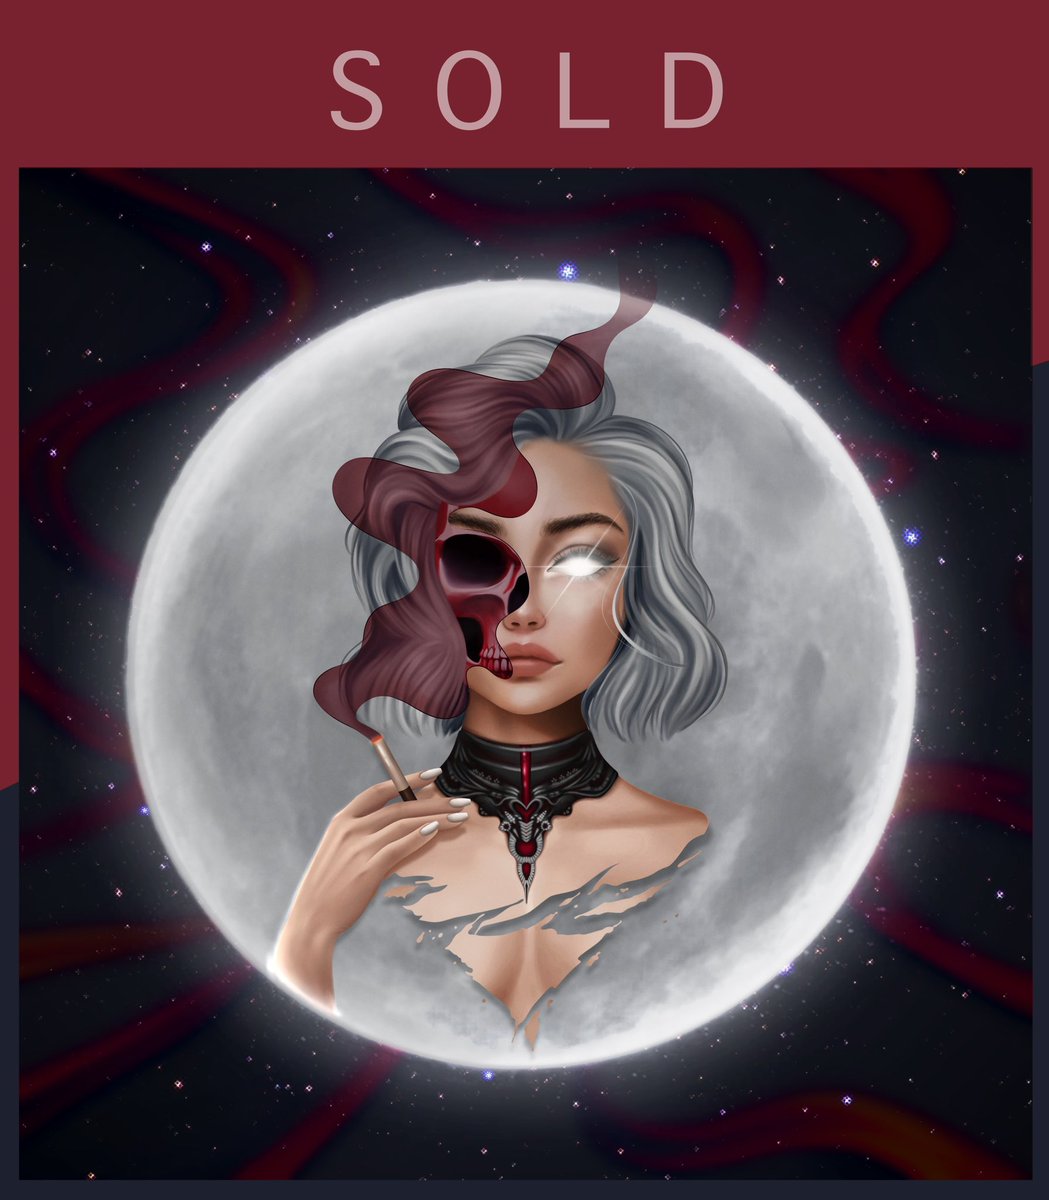 SOLD🥳✨ “Blood Queen” sold to @LovePowerCoin on their lpm.is marketplace. 🥰 If you are an artist, you can mint your artworks on their marketplace for free. ❤️‍🔥✨ #LoveSupports #LoveToken